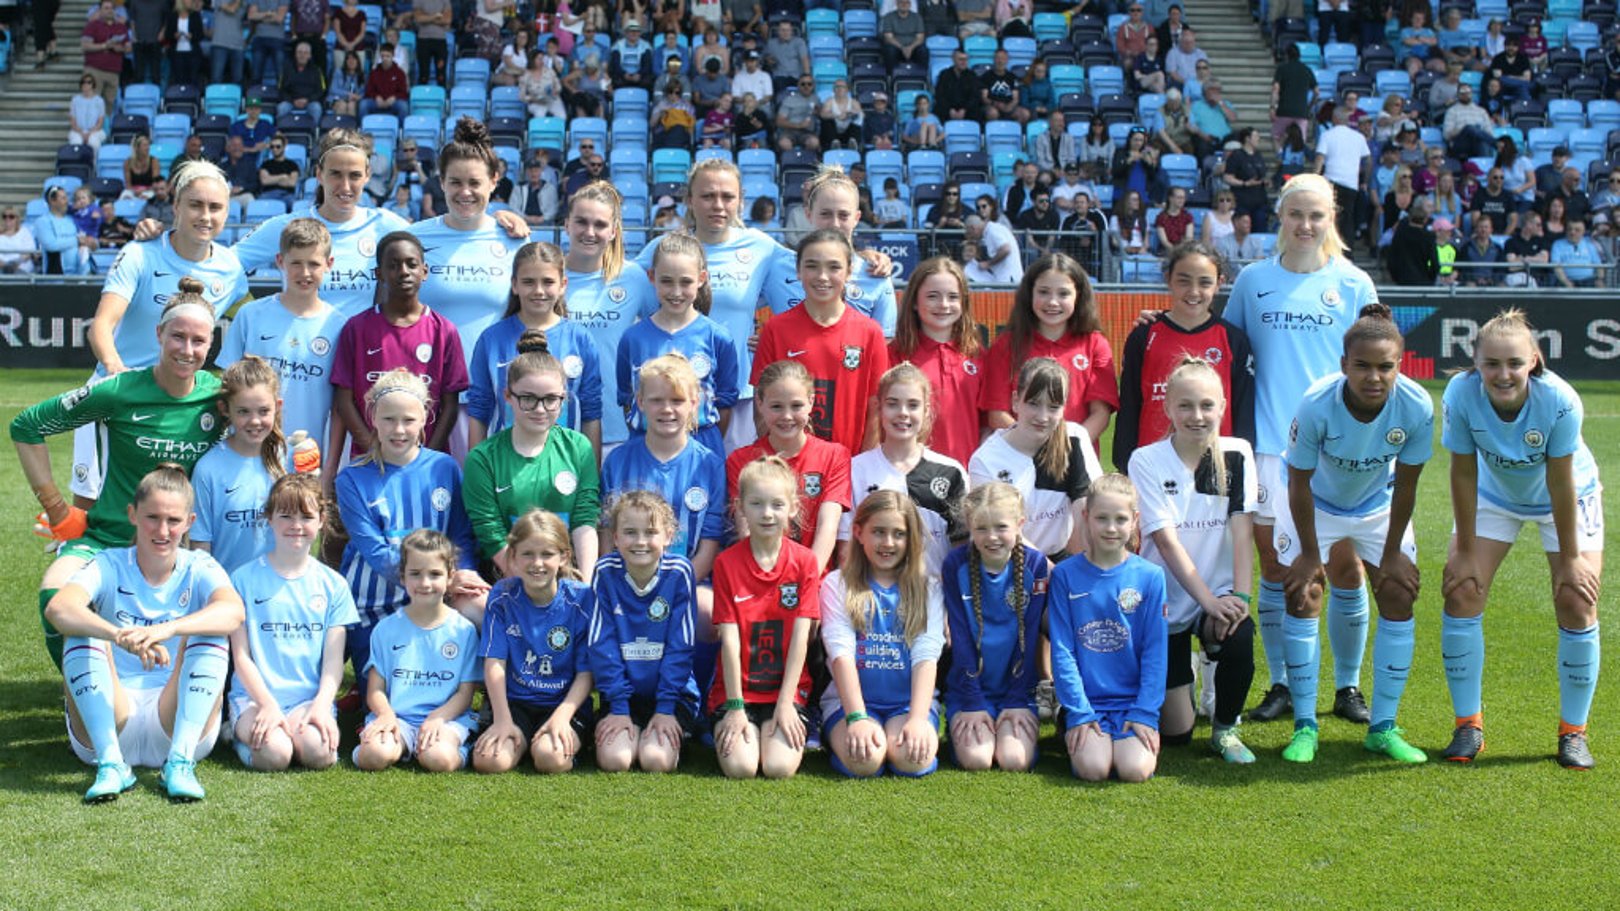 Become affiliated with City's women's team